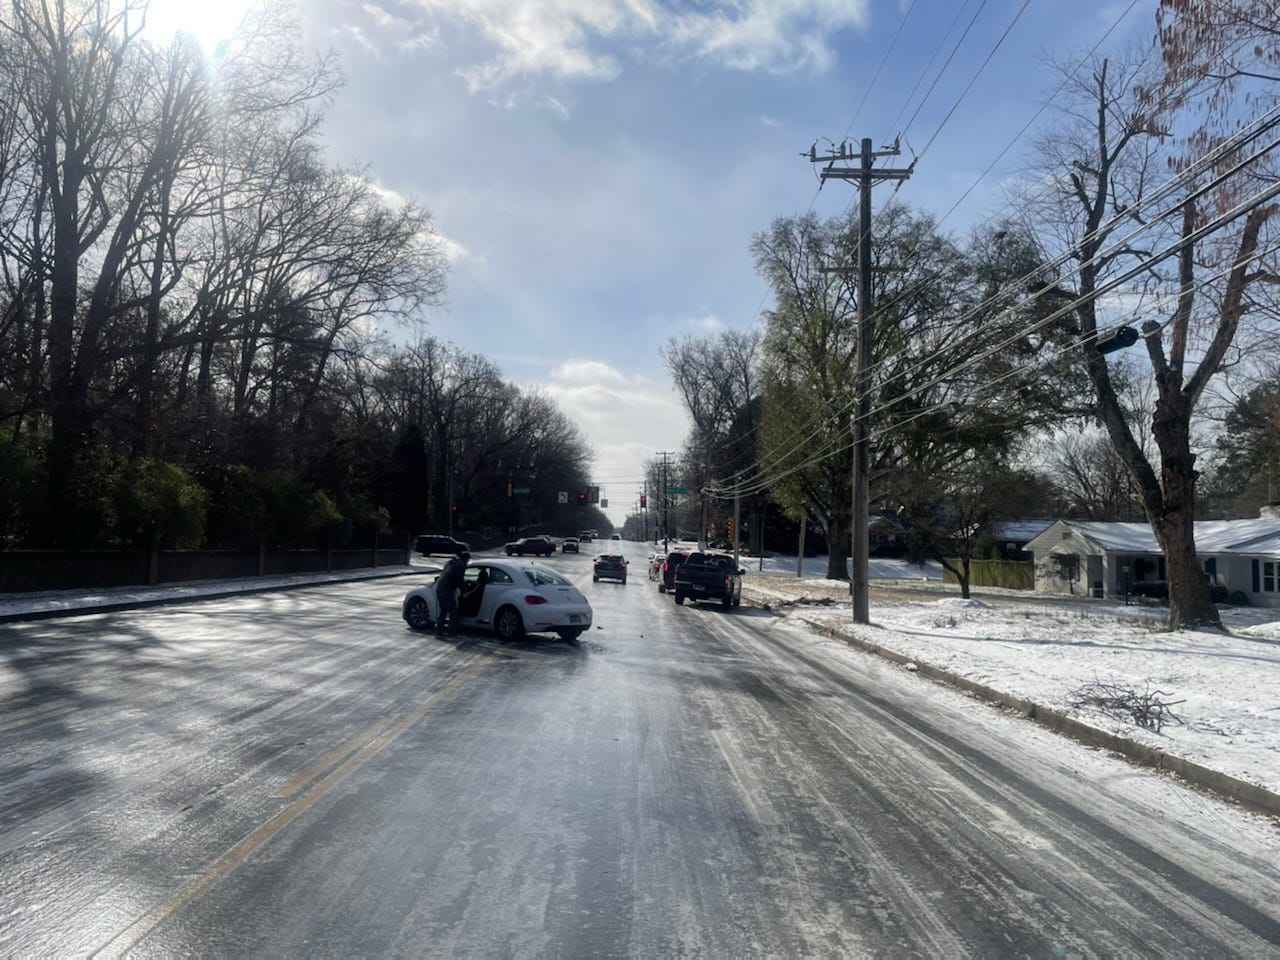 Cars slide across an ice-covered White Station Road in Memphis on Dec. 23. Memphis roads were coated in snow and ice after a cold front dropped temperatures into single digits.